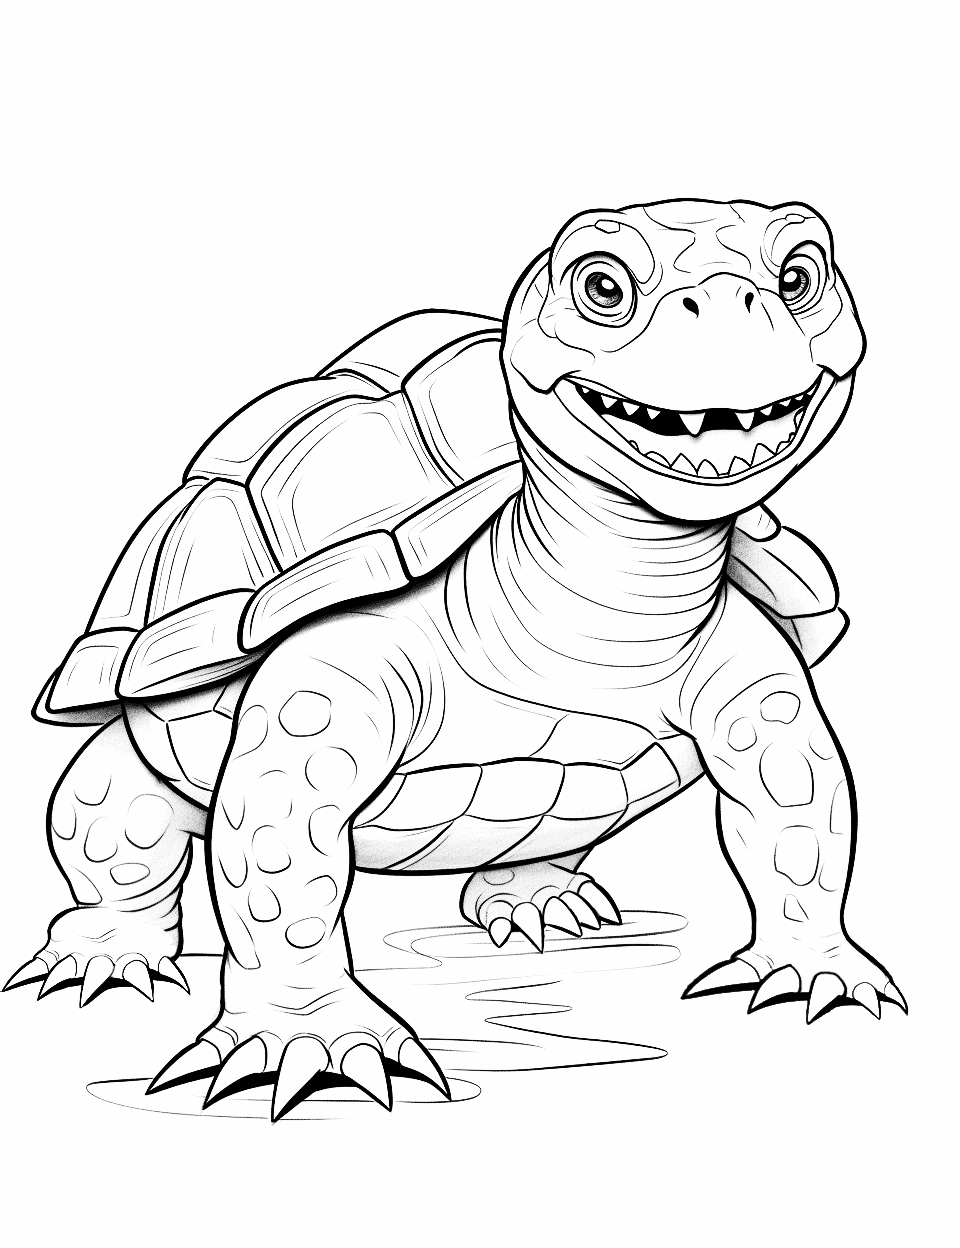 Snapping Turtle Coloring Page - A snapping turtle with its mouth slightly open, ready to snap.